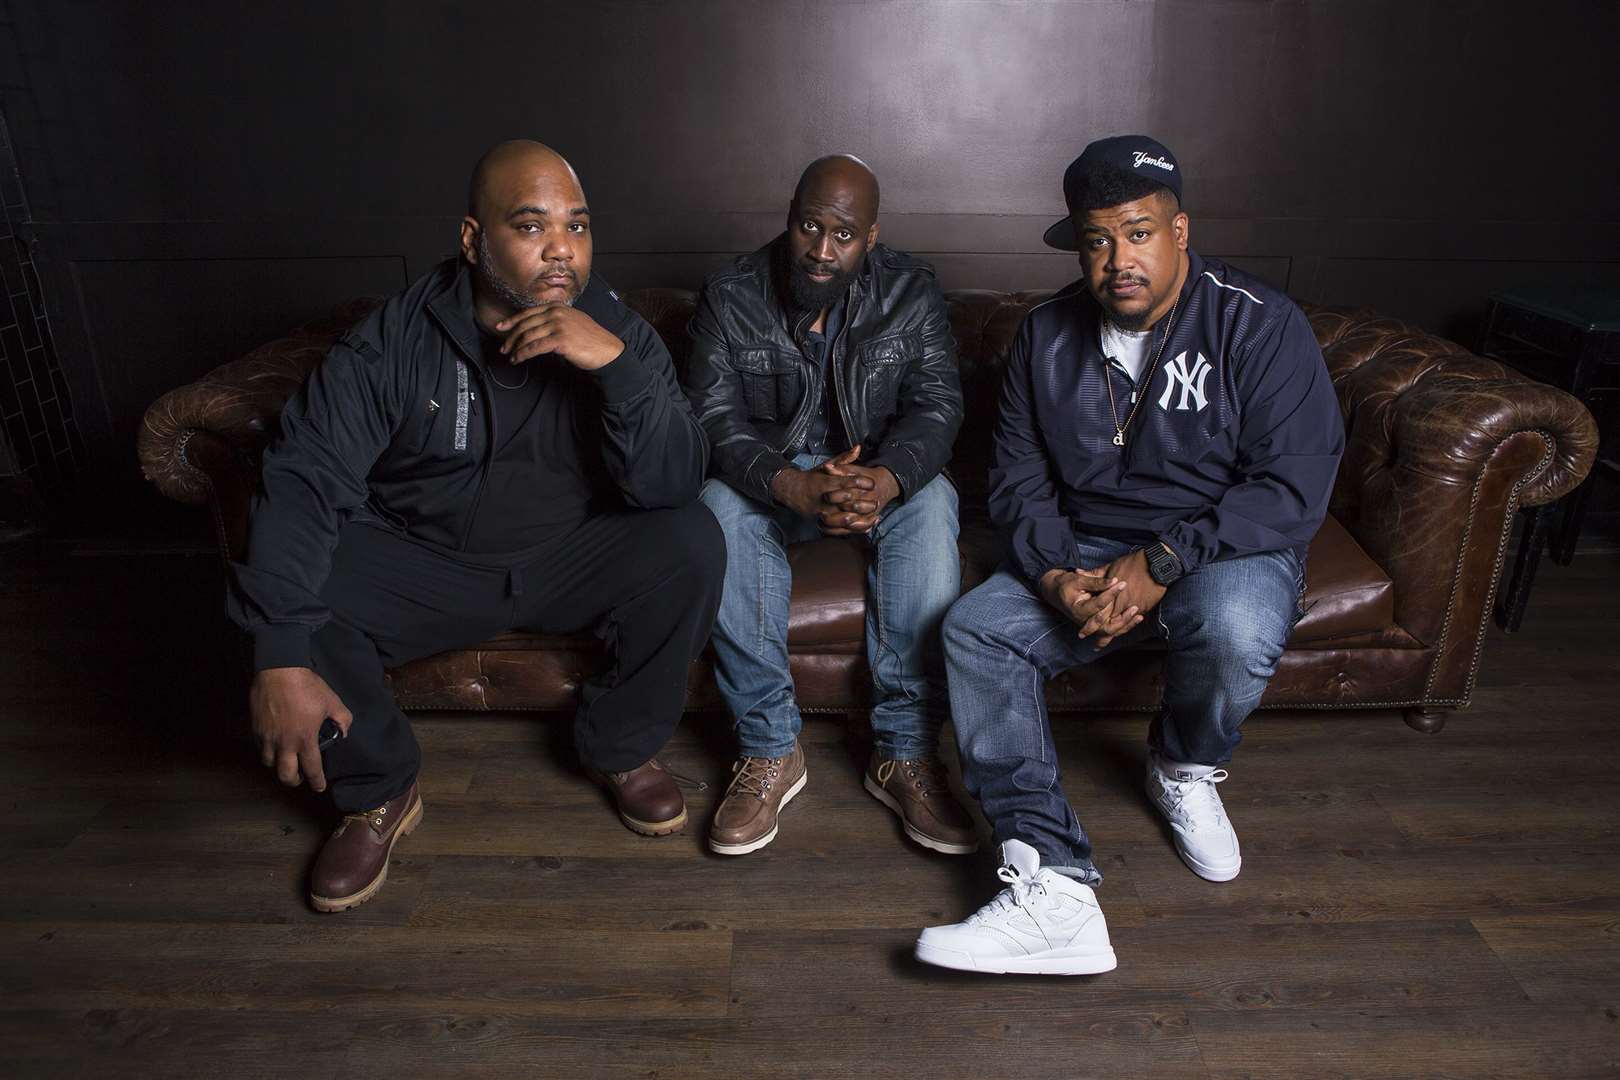 De La Soul are celebrating more than 30 years in the music industry at Dreamland this summer. Picture: Dreamland